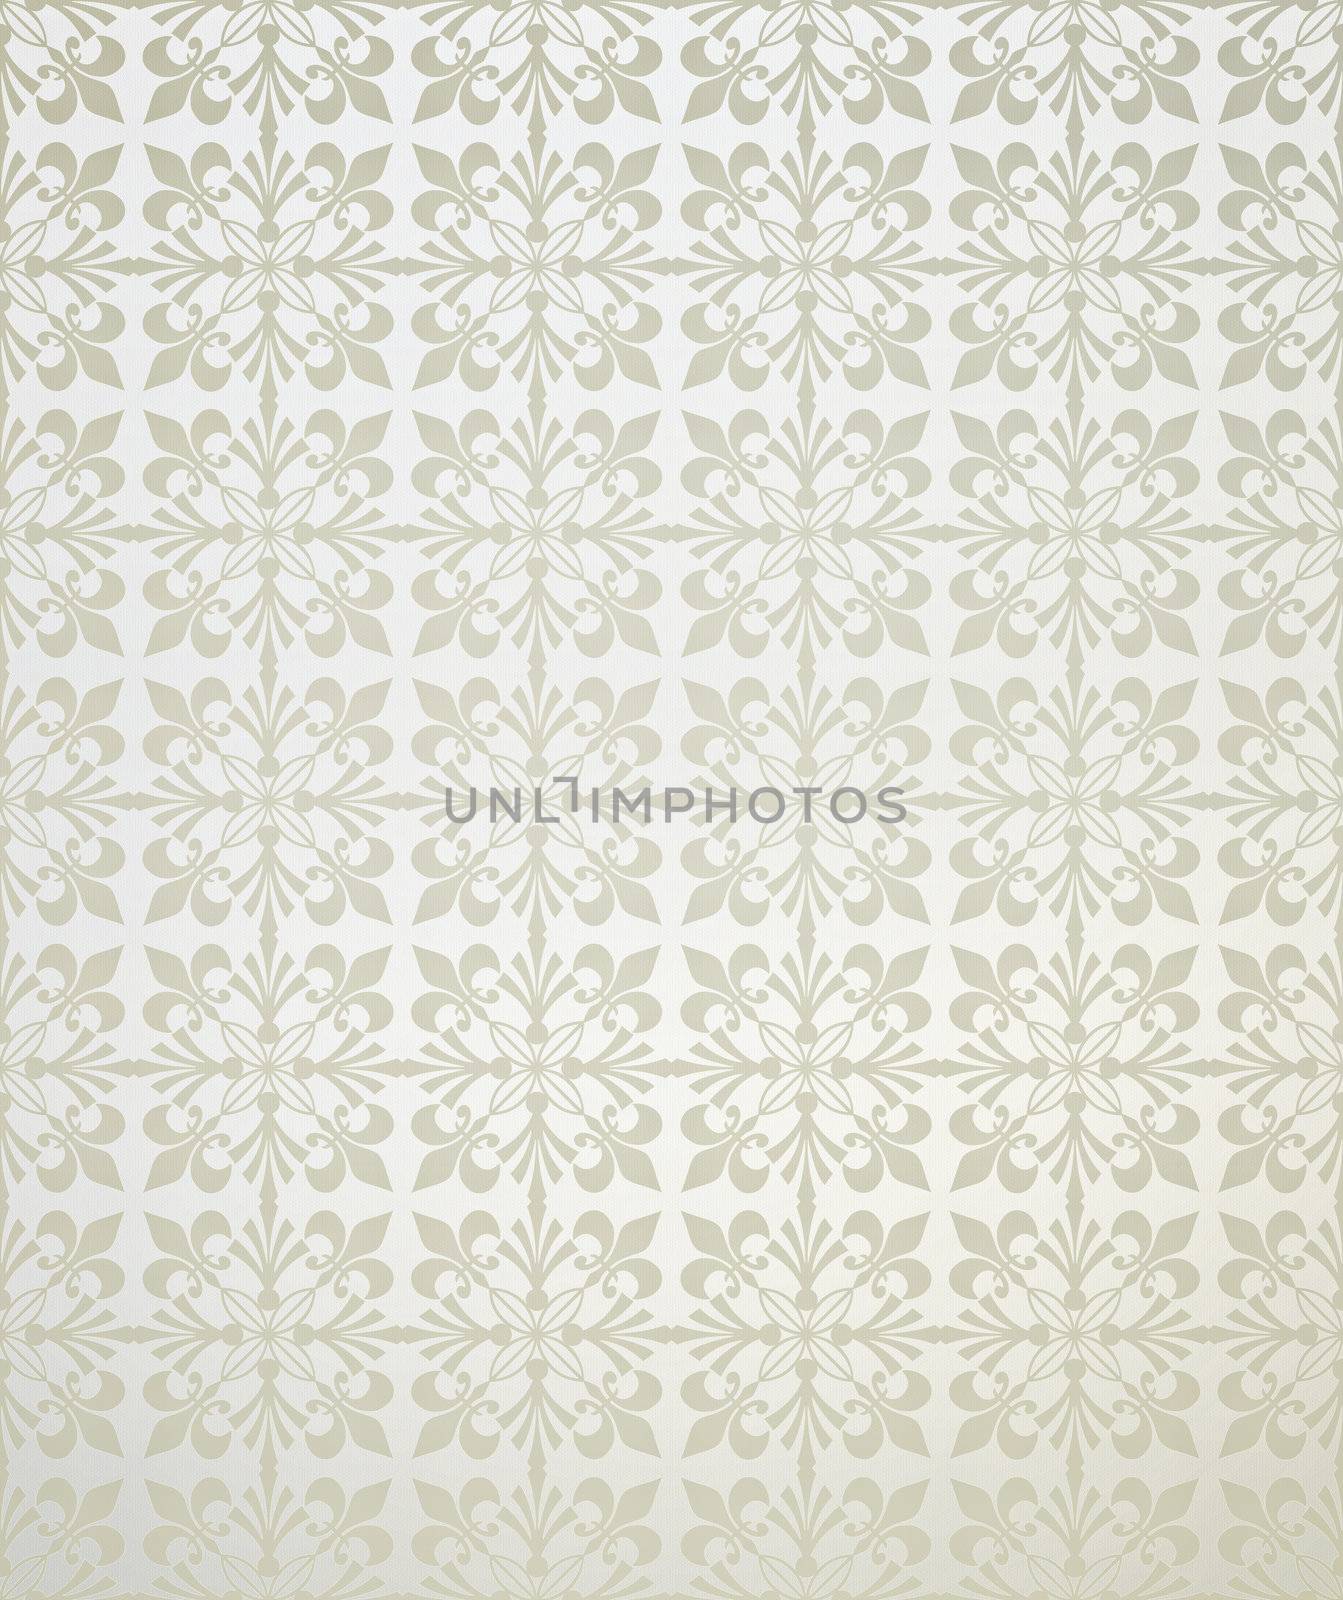 Repetitive floral wallpaper by silent47